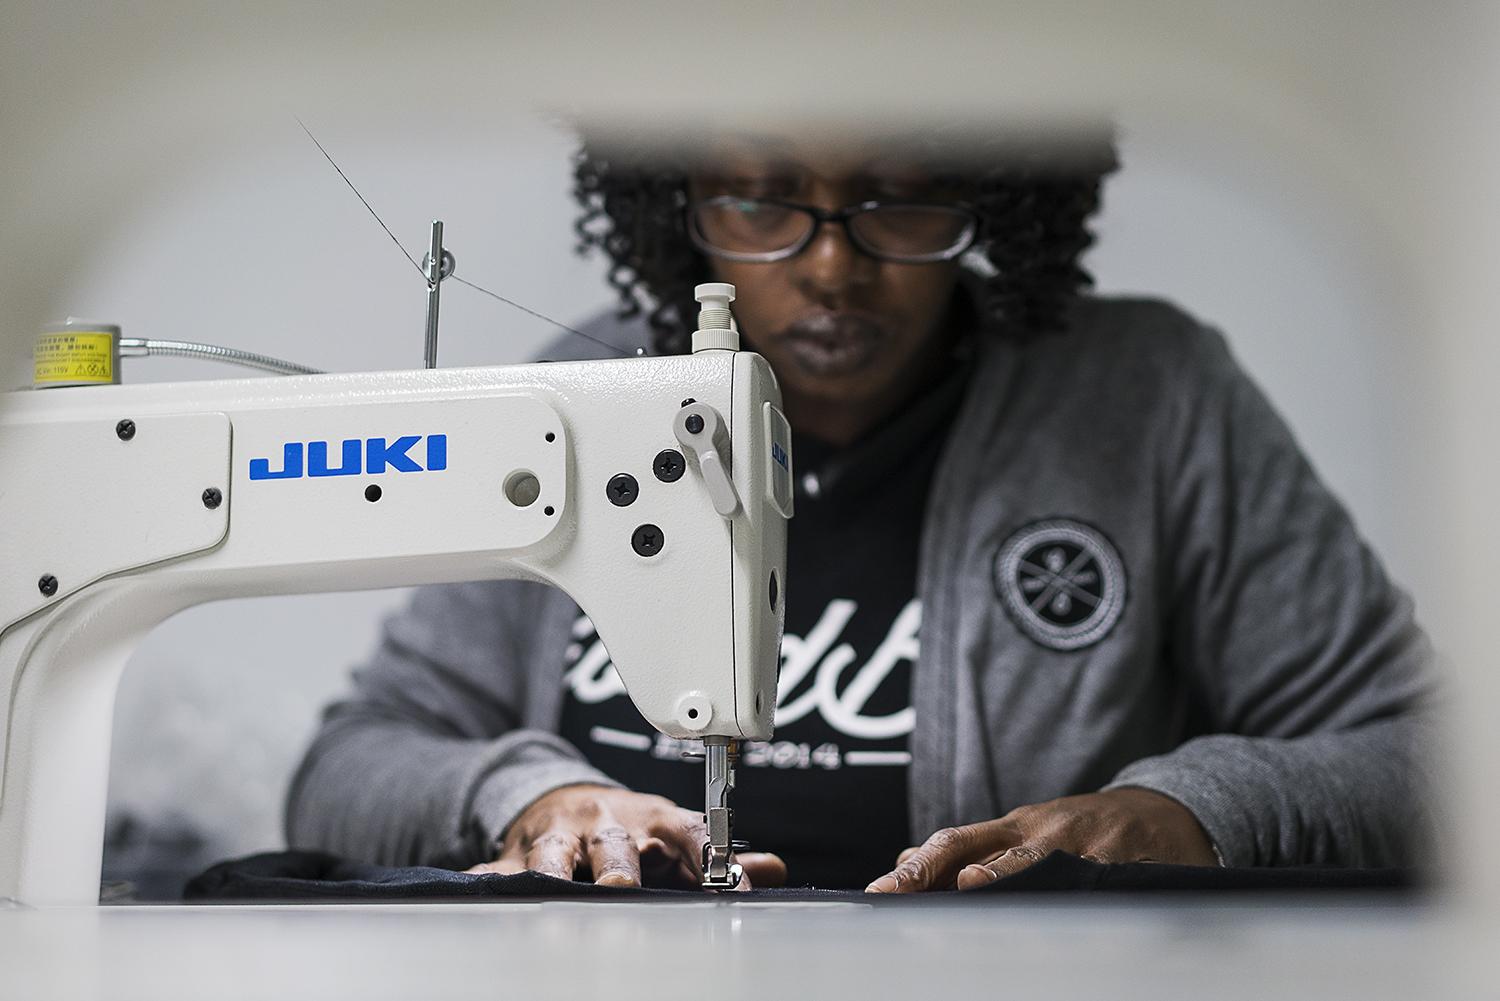 GoodBoy Clothing textile expert Tameka Davis, 37, of Flint, stitches tags into new shirts that are headed to the showroom at the new GoodBoy Clothing storefront in downtown Flint.